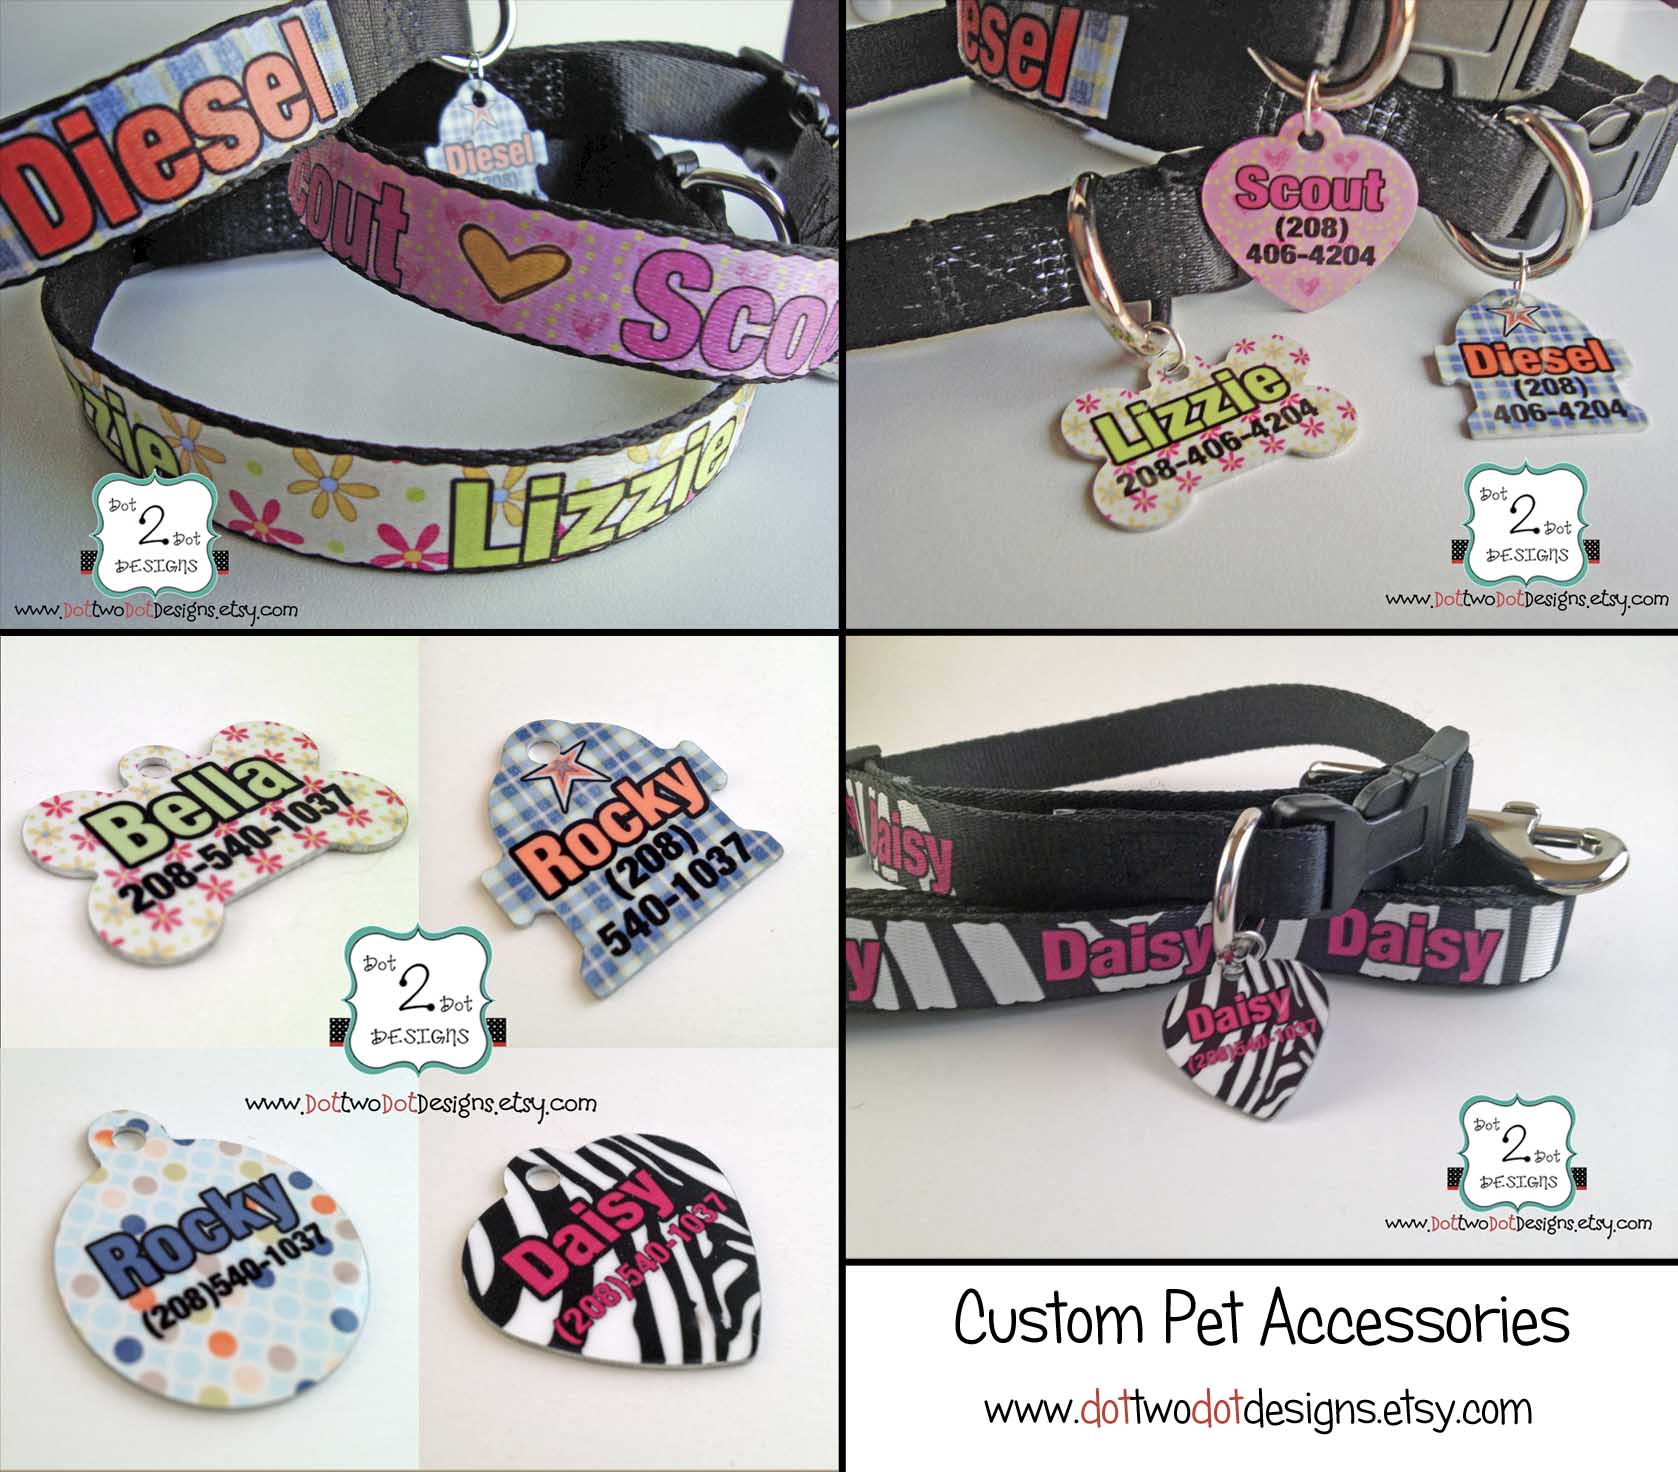 Pet Accessories made with sublimation printing